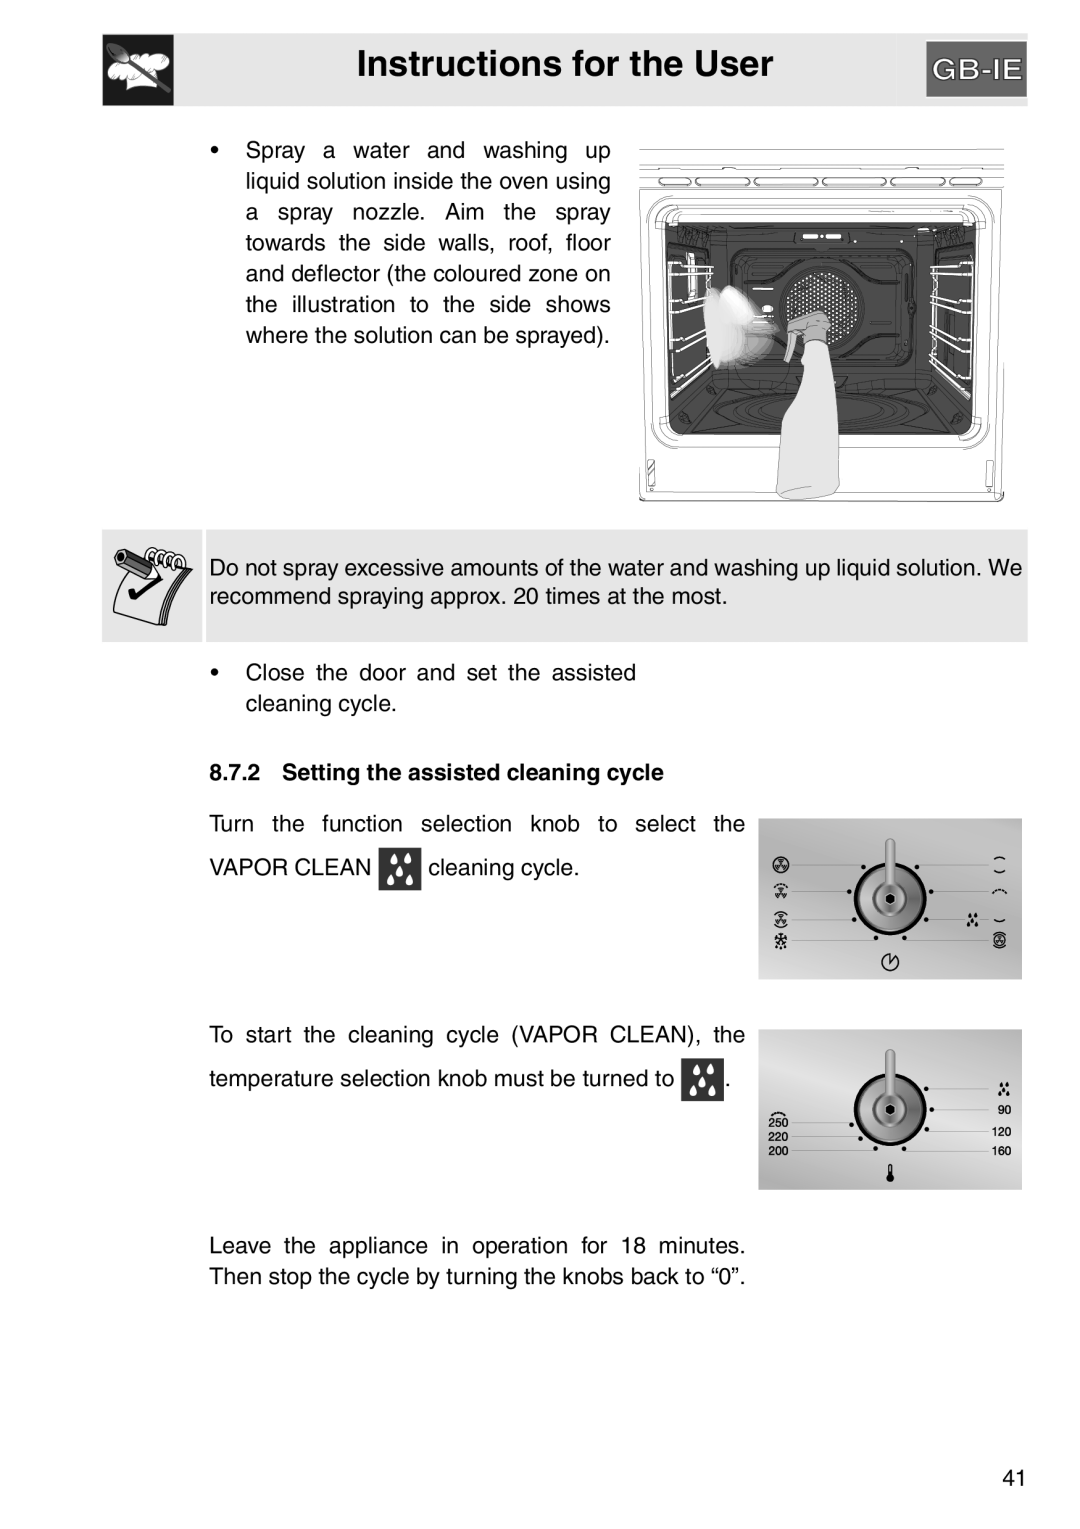 Smeg SA561X-9 installation instructions Instructions for the User, Setting the assisted cleaning cycle 